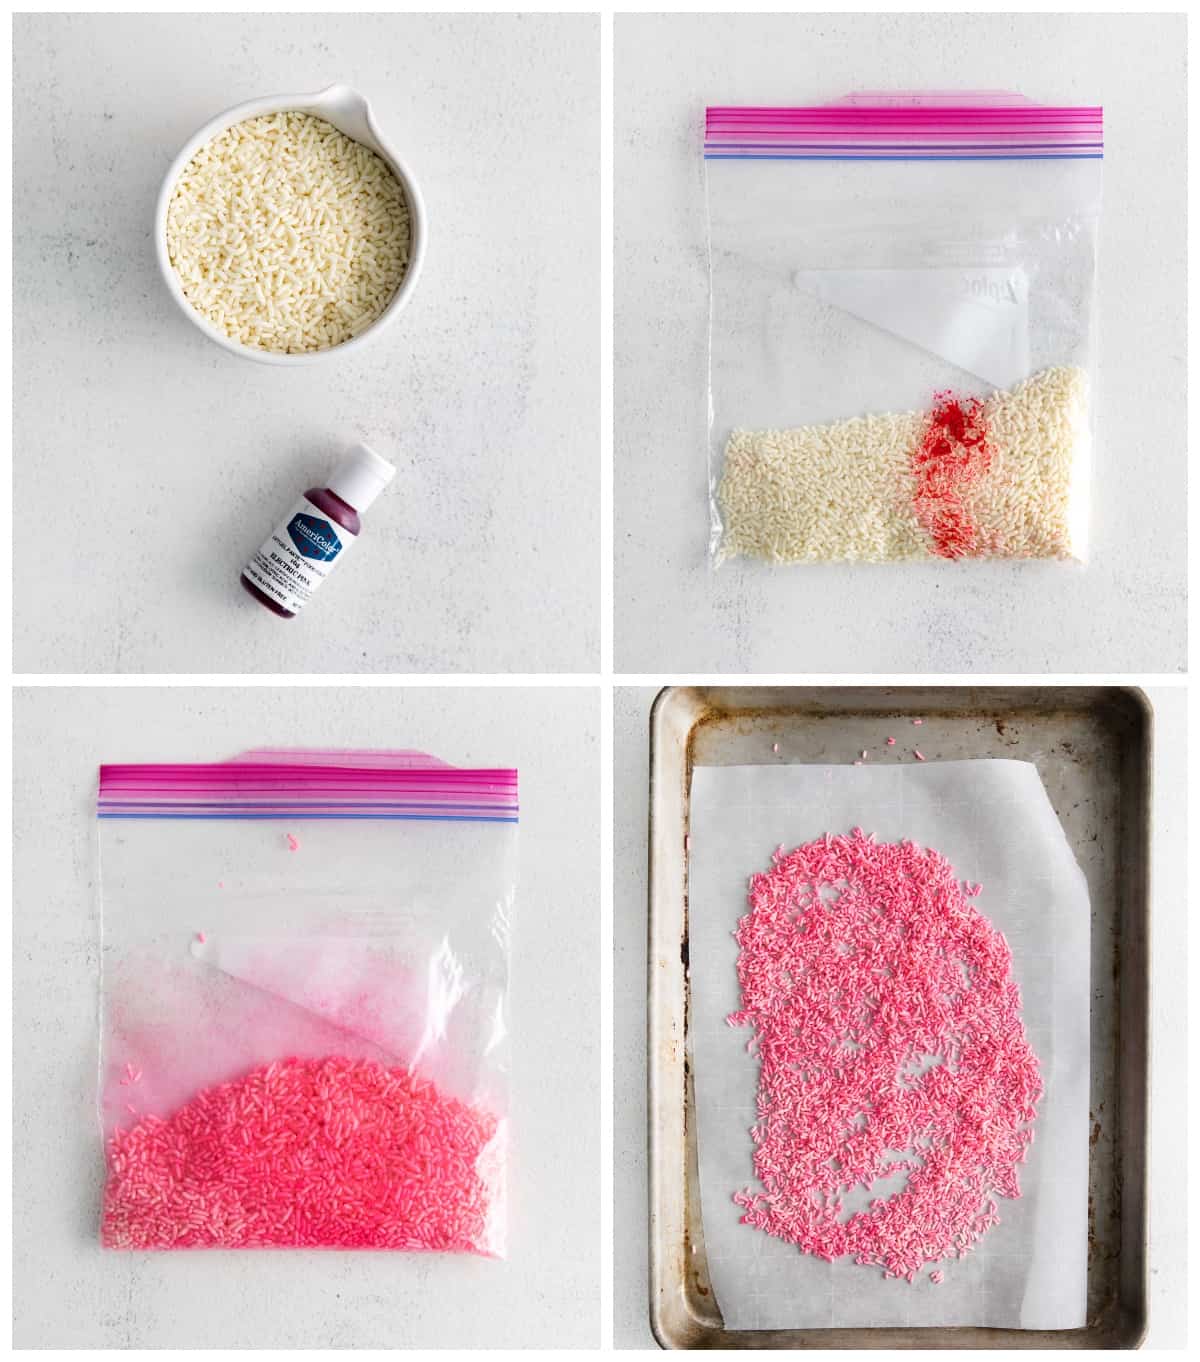 how to dye sprinkles step by step photo instructions